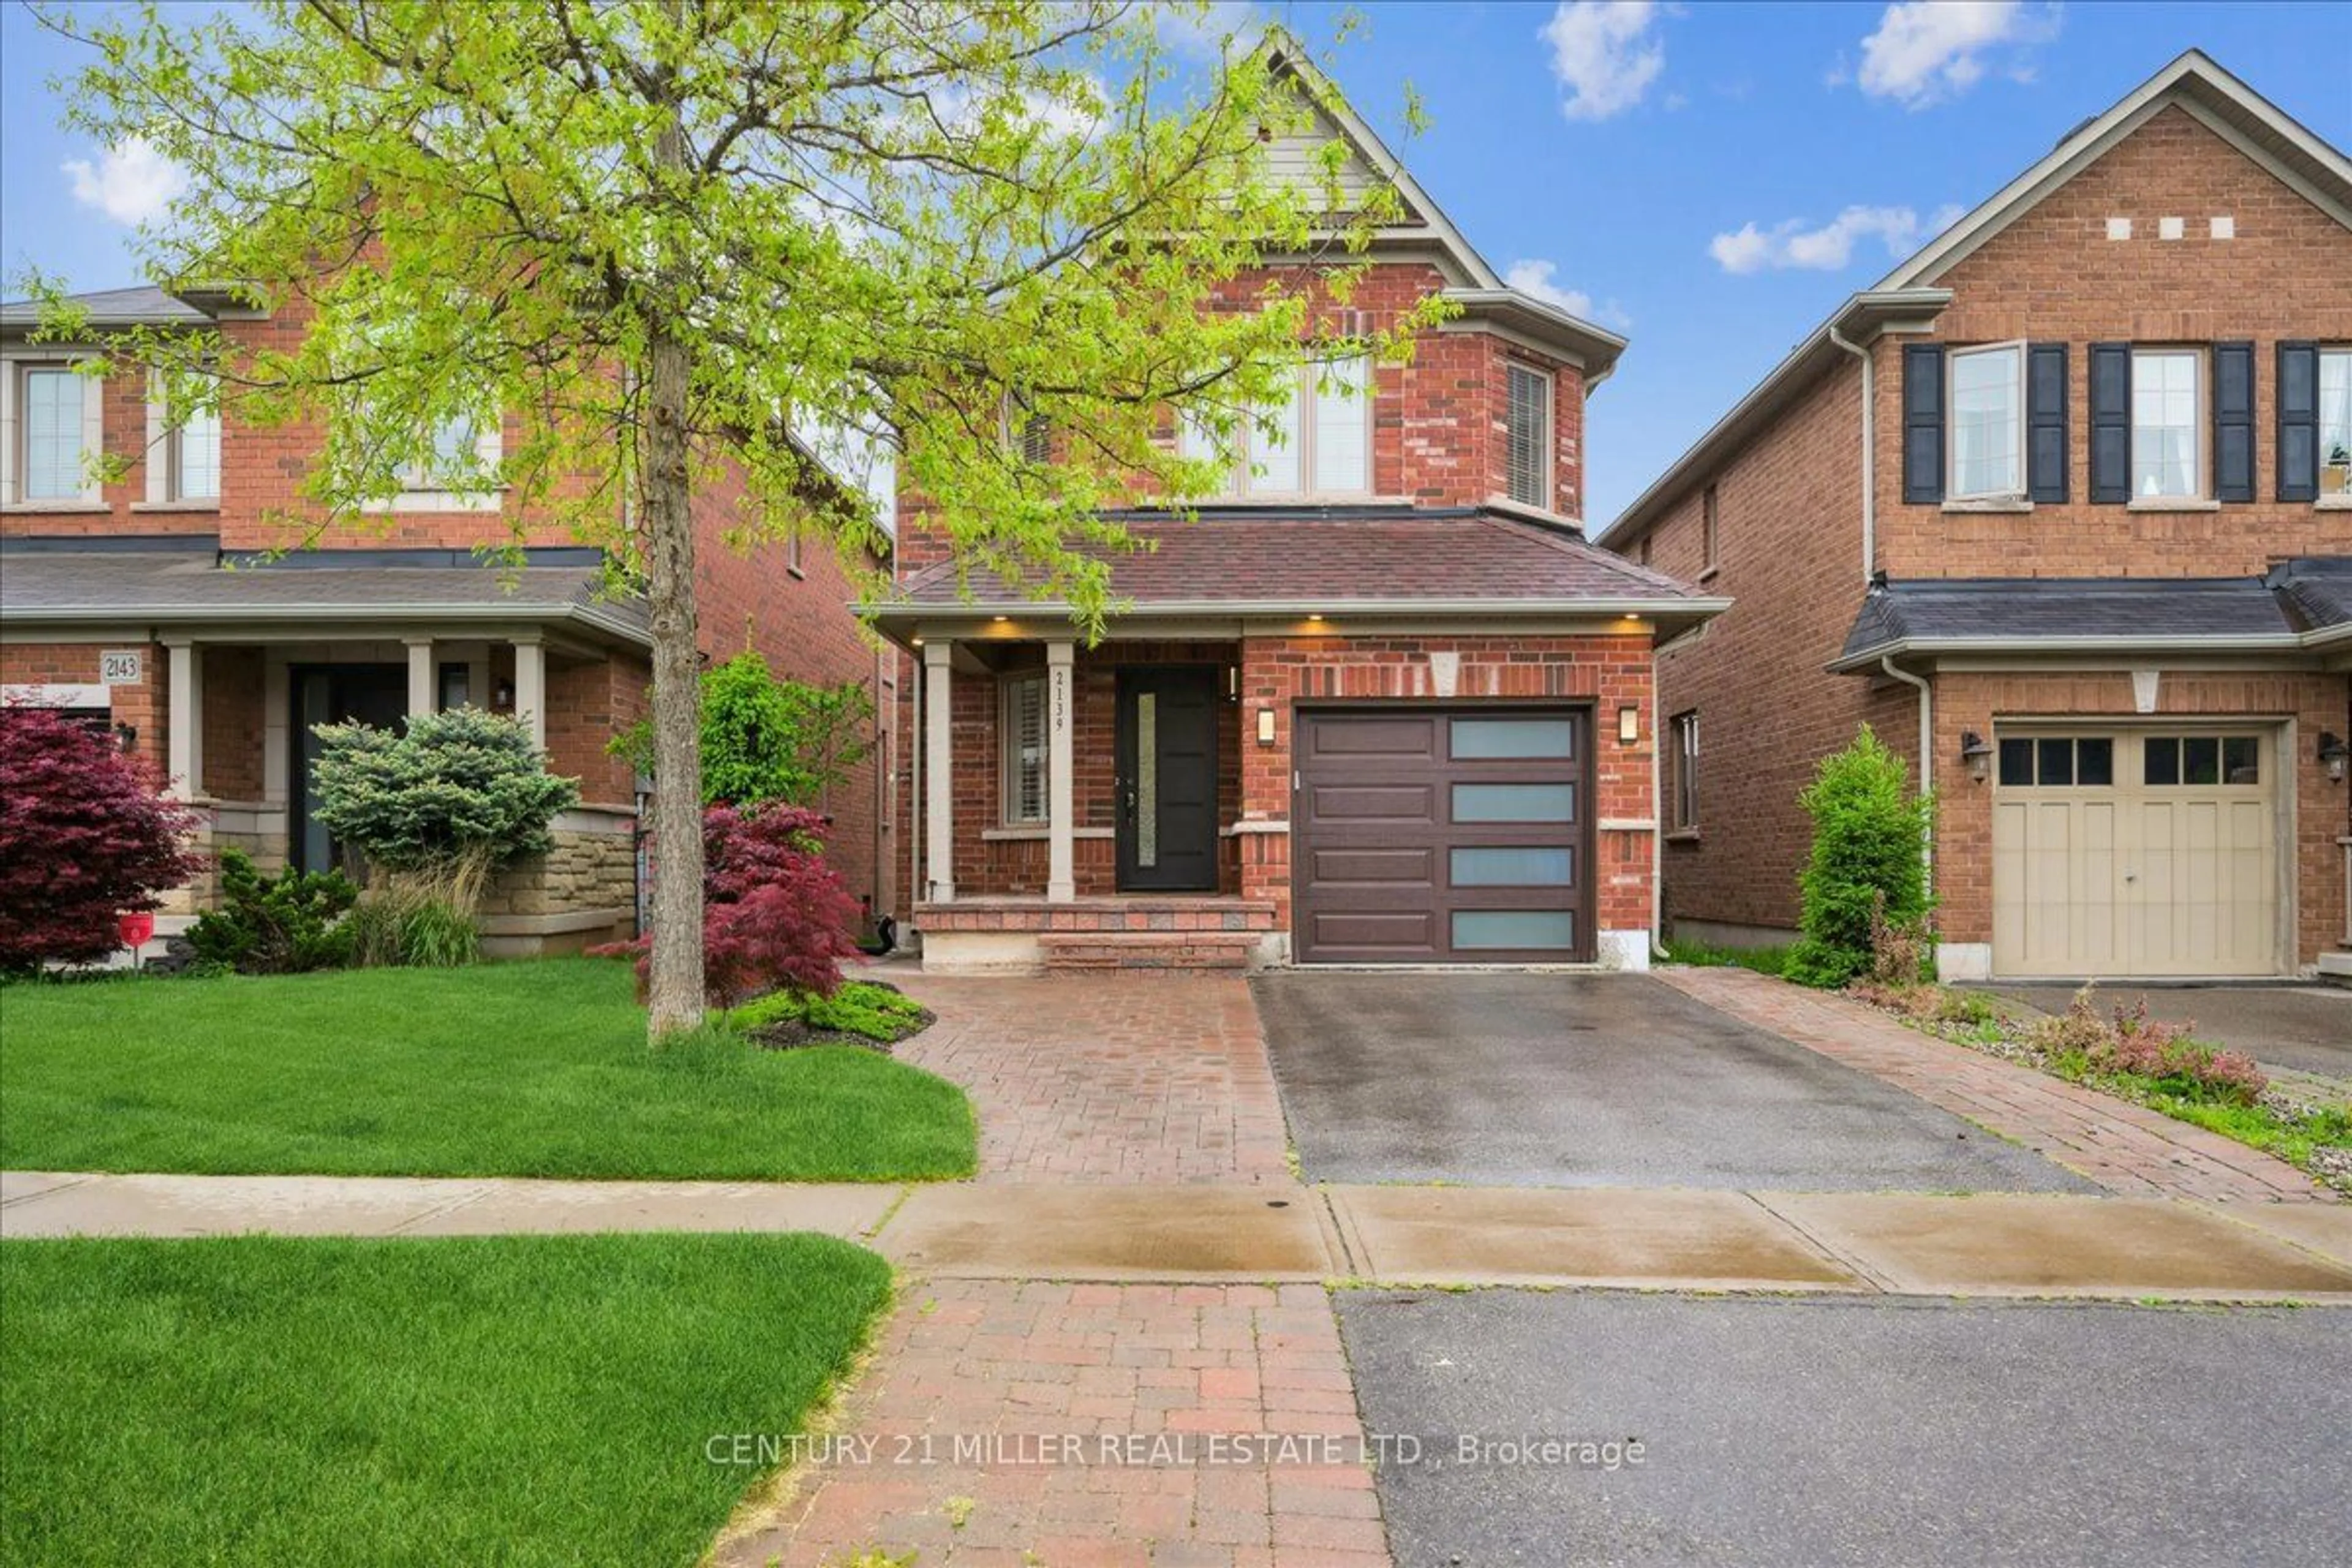 Home with brick exterior material for 2139 Fiddlers Way, Oakville Ontario L6M 0M5